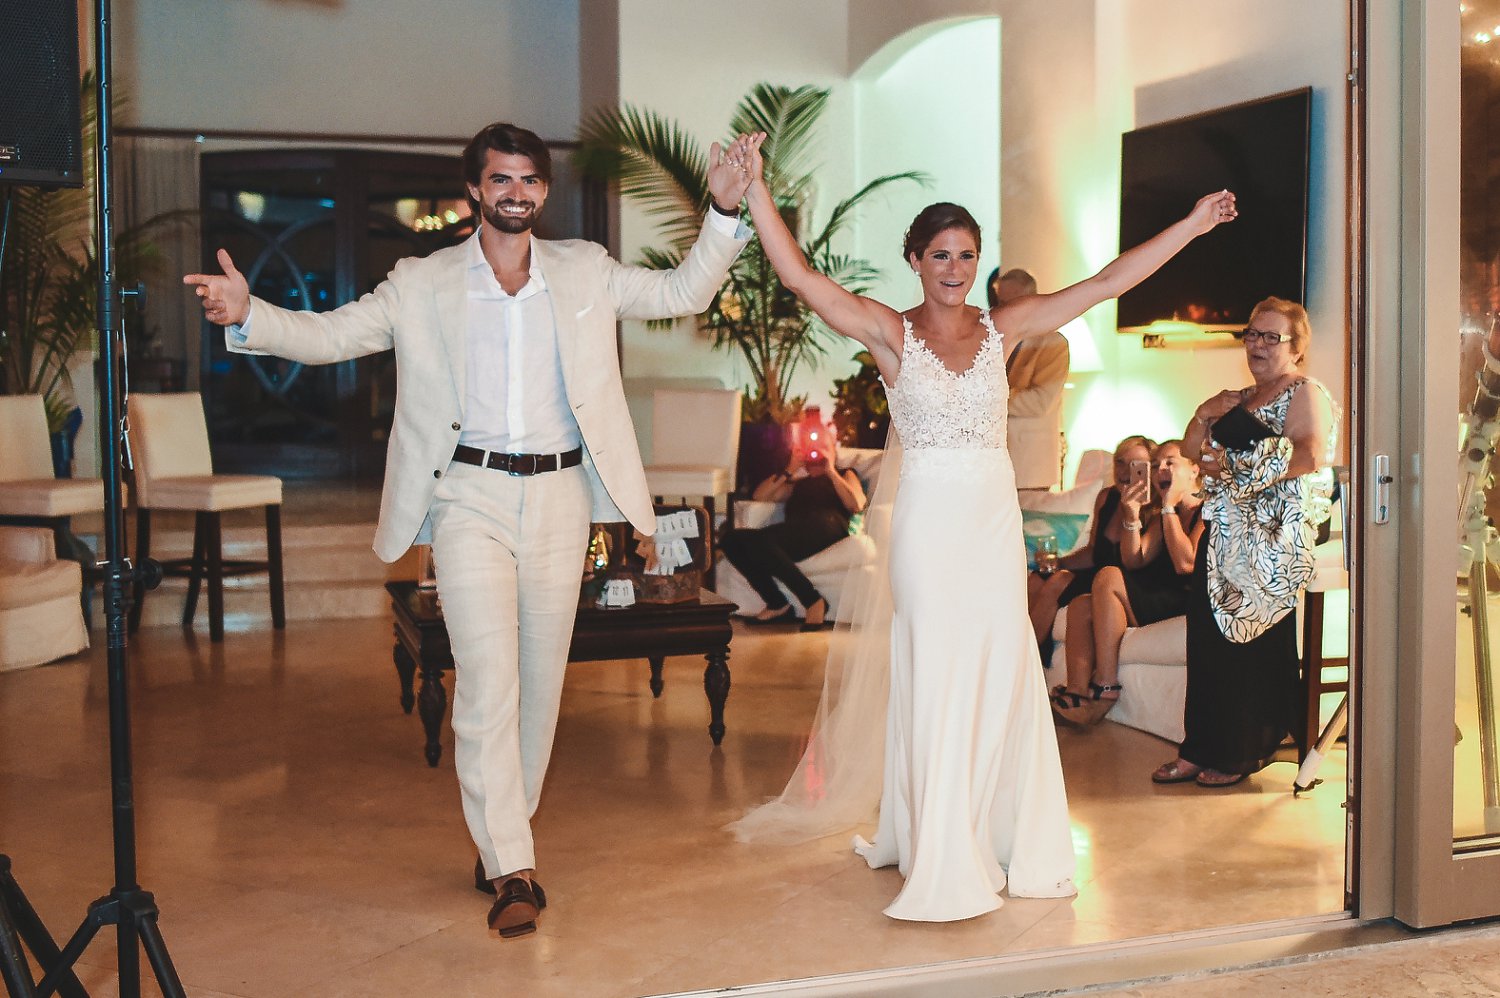 Just married couple walks into wedding reception for first dance.